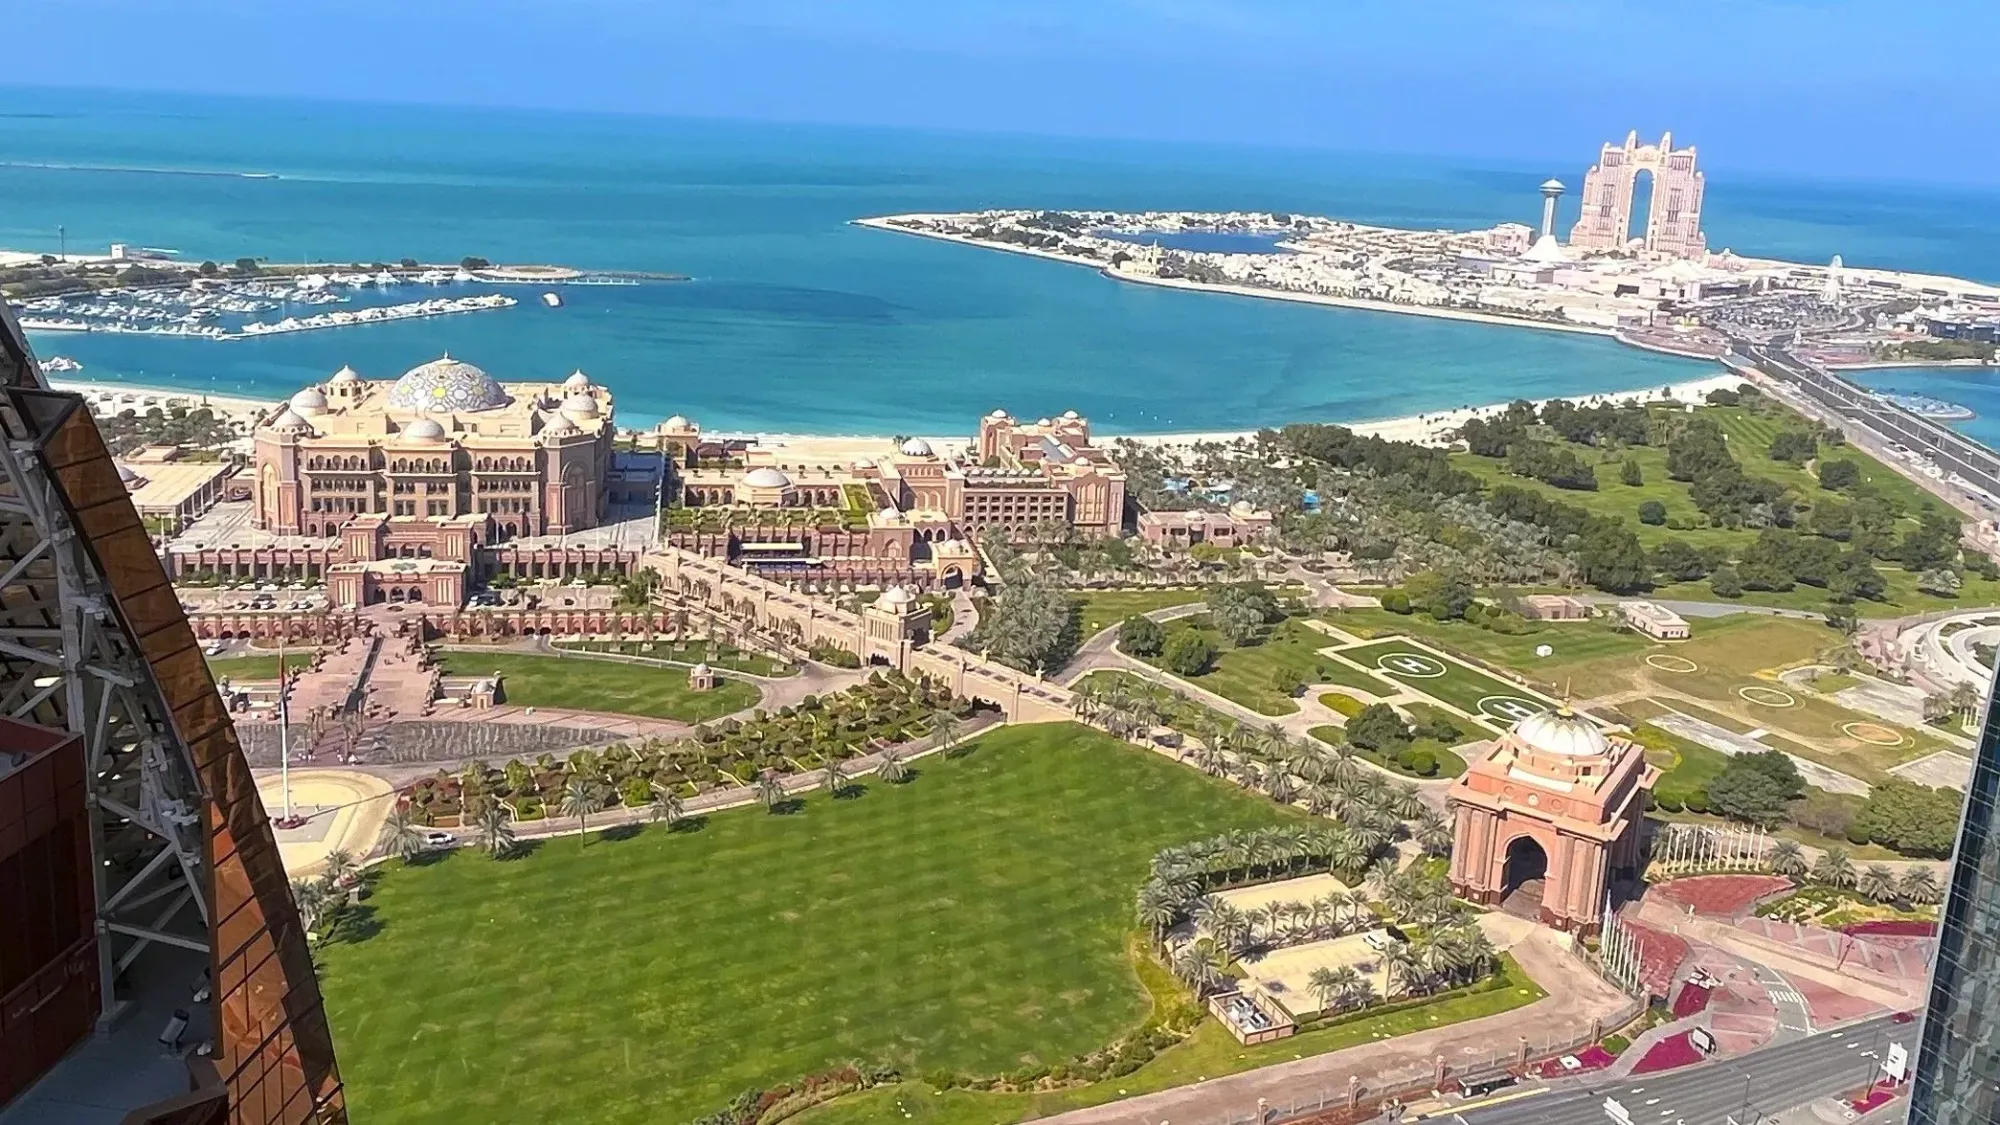 Overhead view of the old Presidential Palace in Abu Dhabi